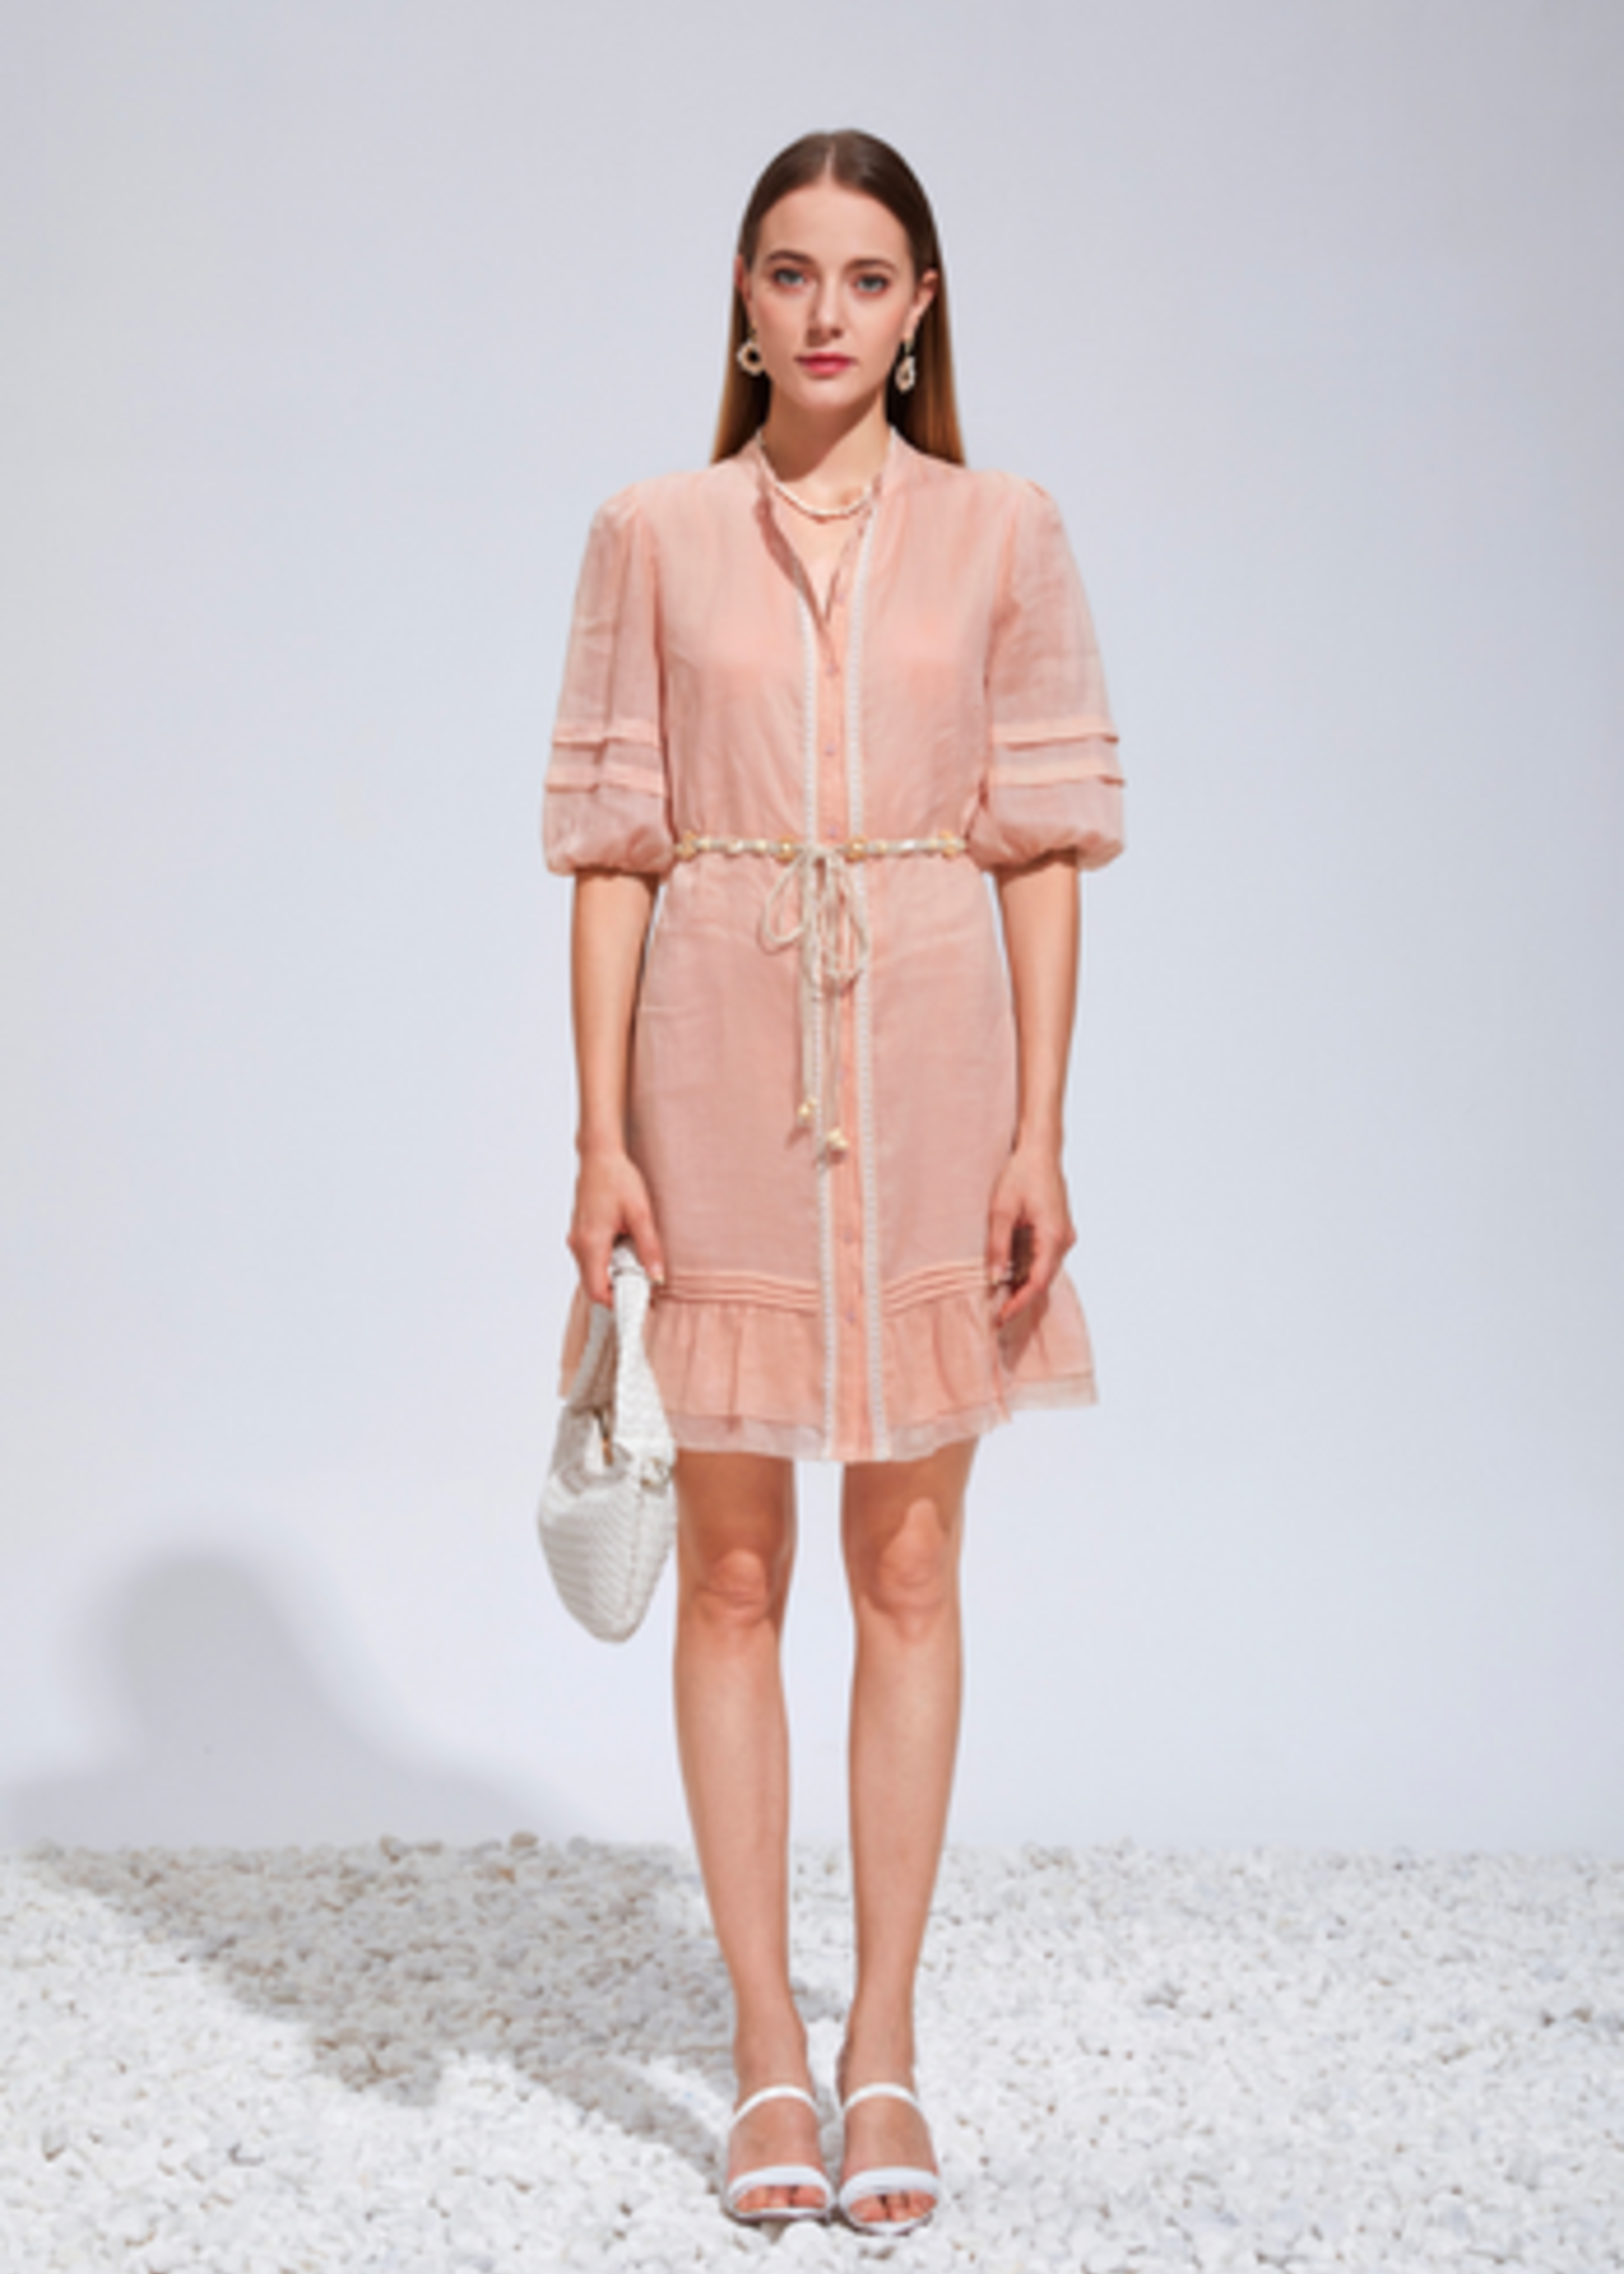 Luisa Linen Belted Dress in Creole Pink